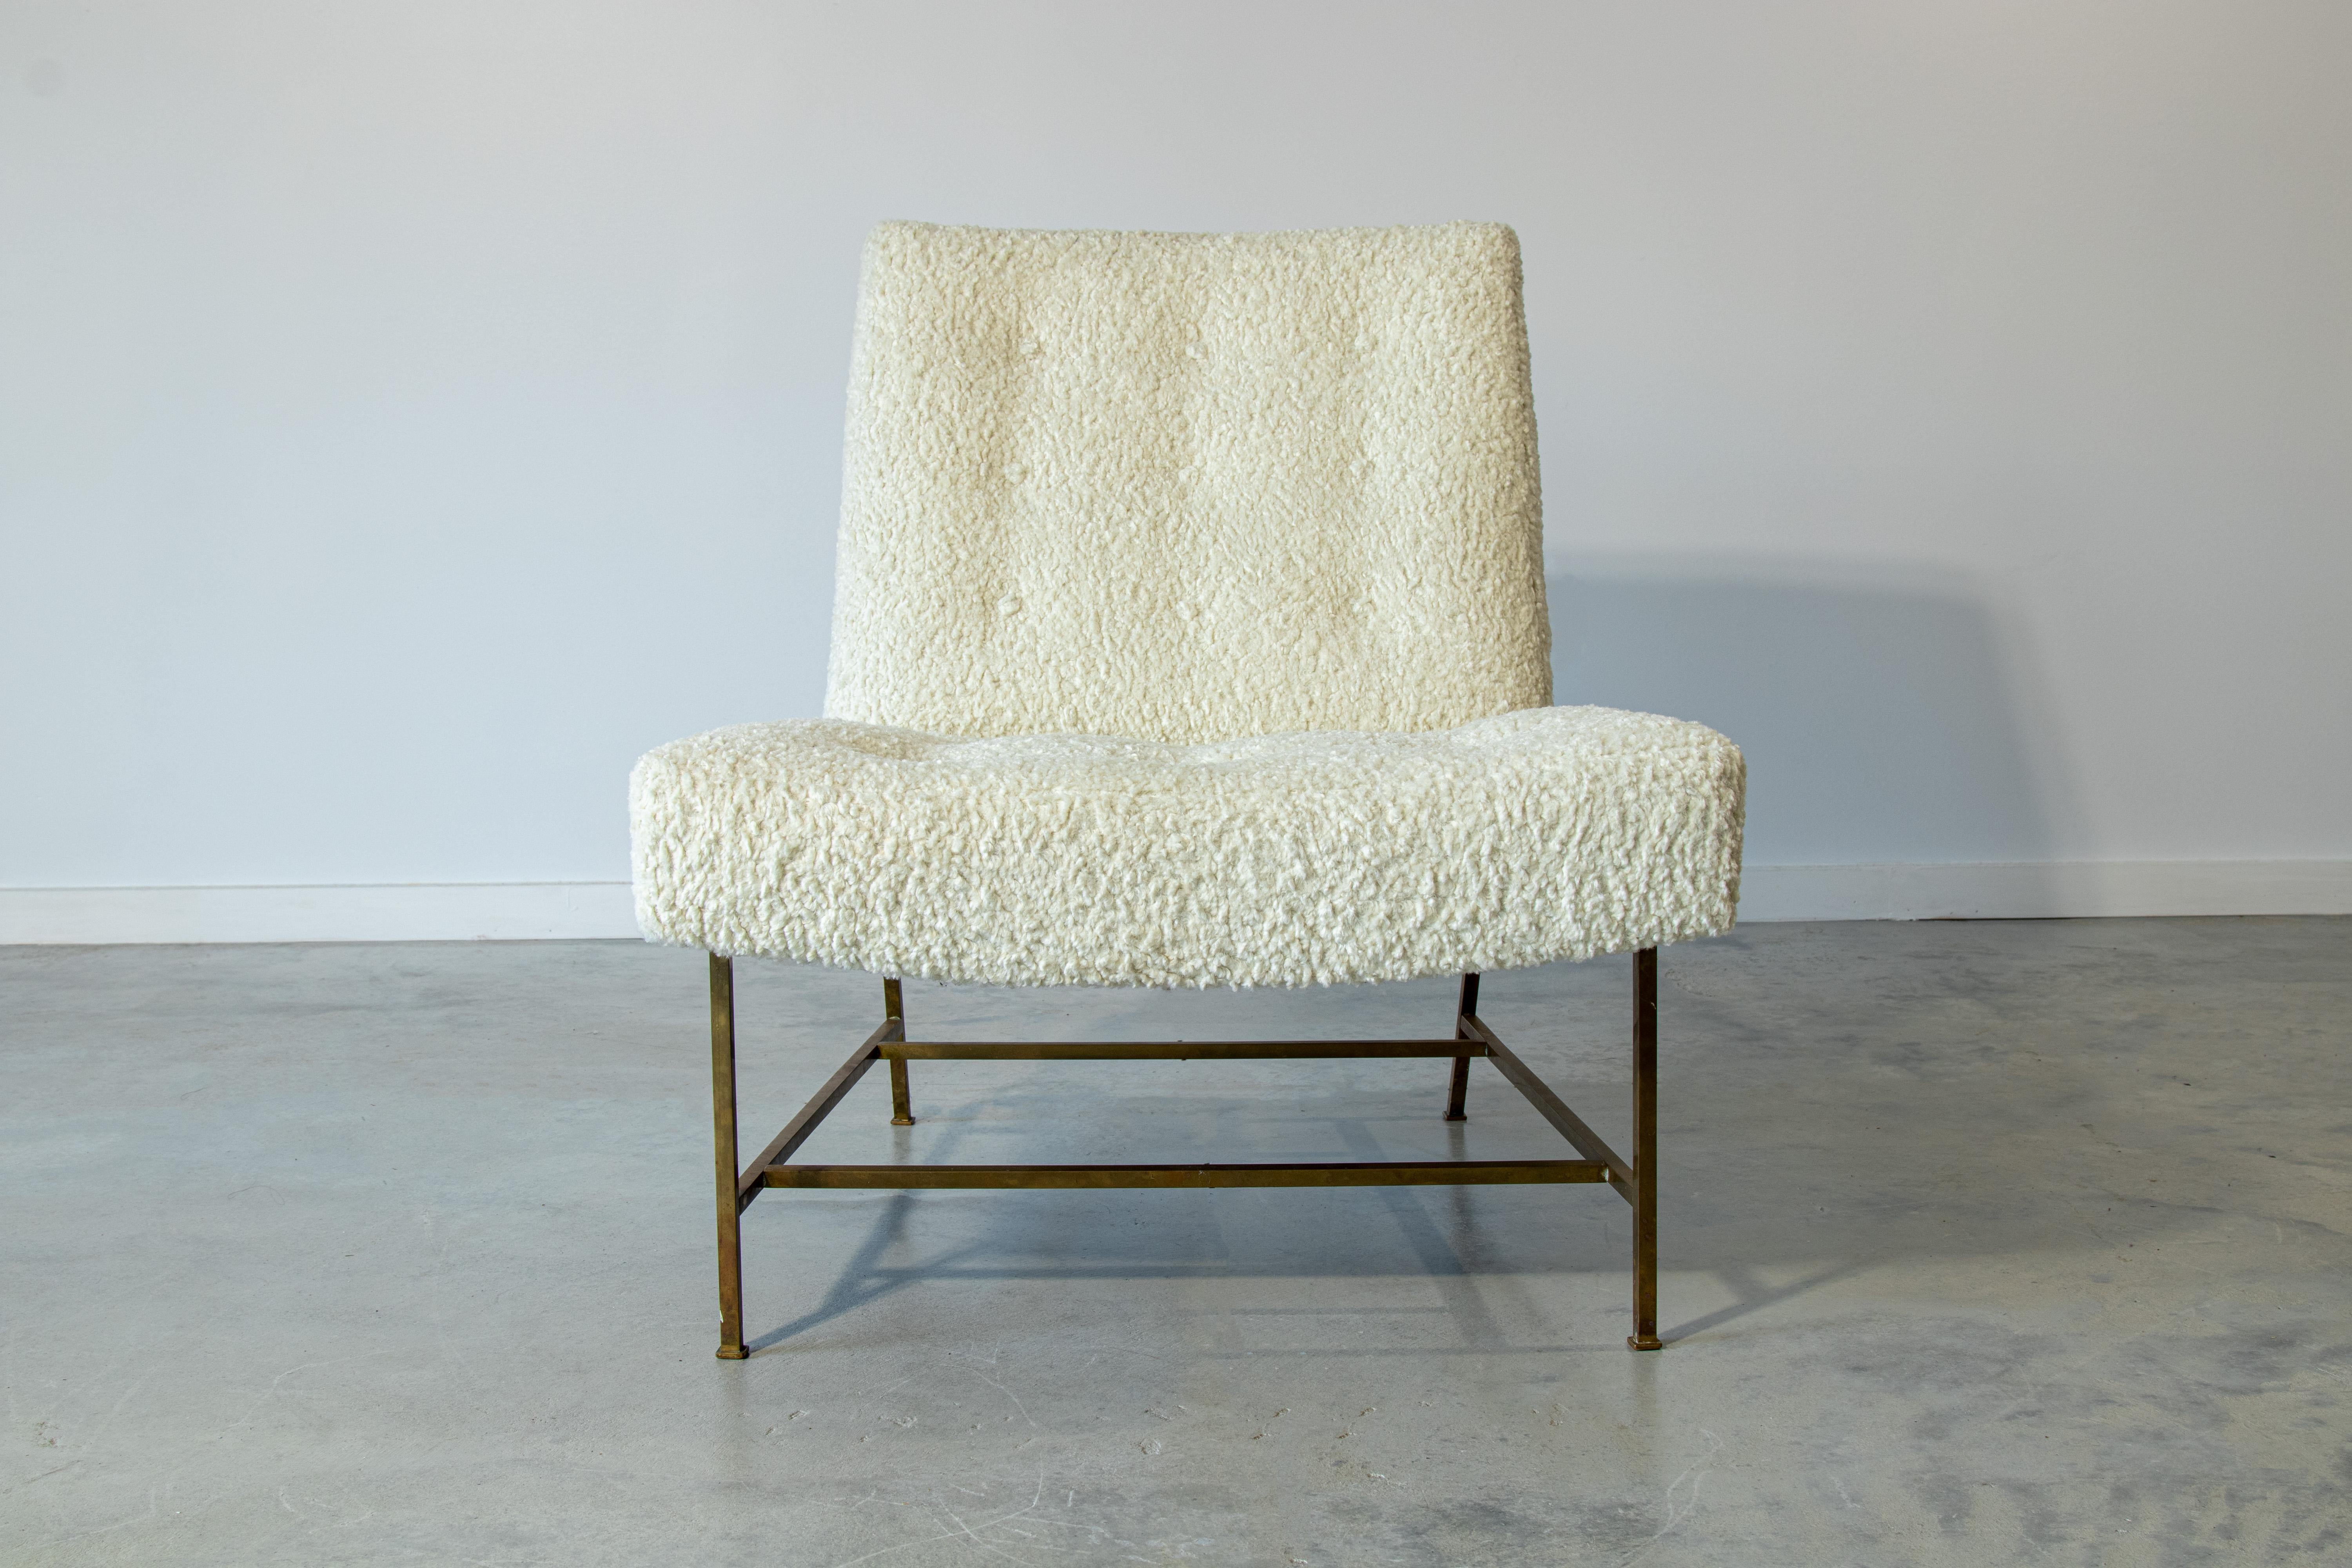 A rare offering from Harvey Probber. Very few examples have surfaced of this chair. Fully restored in white boucle with great curves floating on thin solid brass legs.

Condition:

New fabric and upholstery restored to original specifications